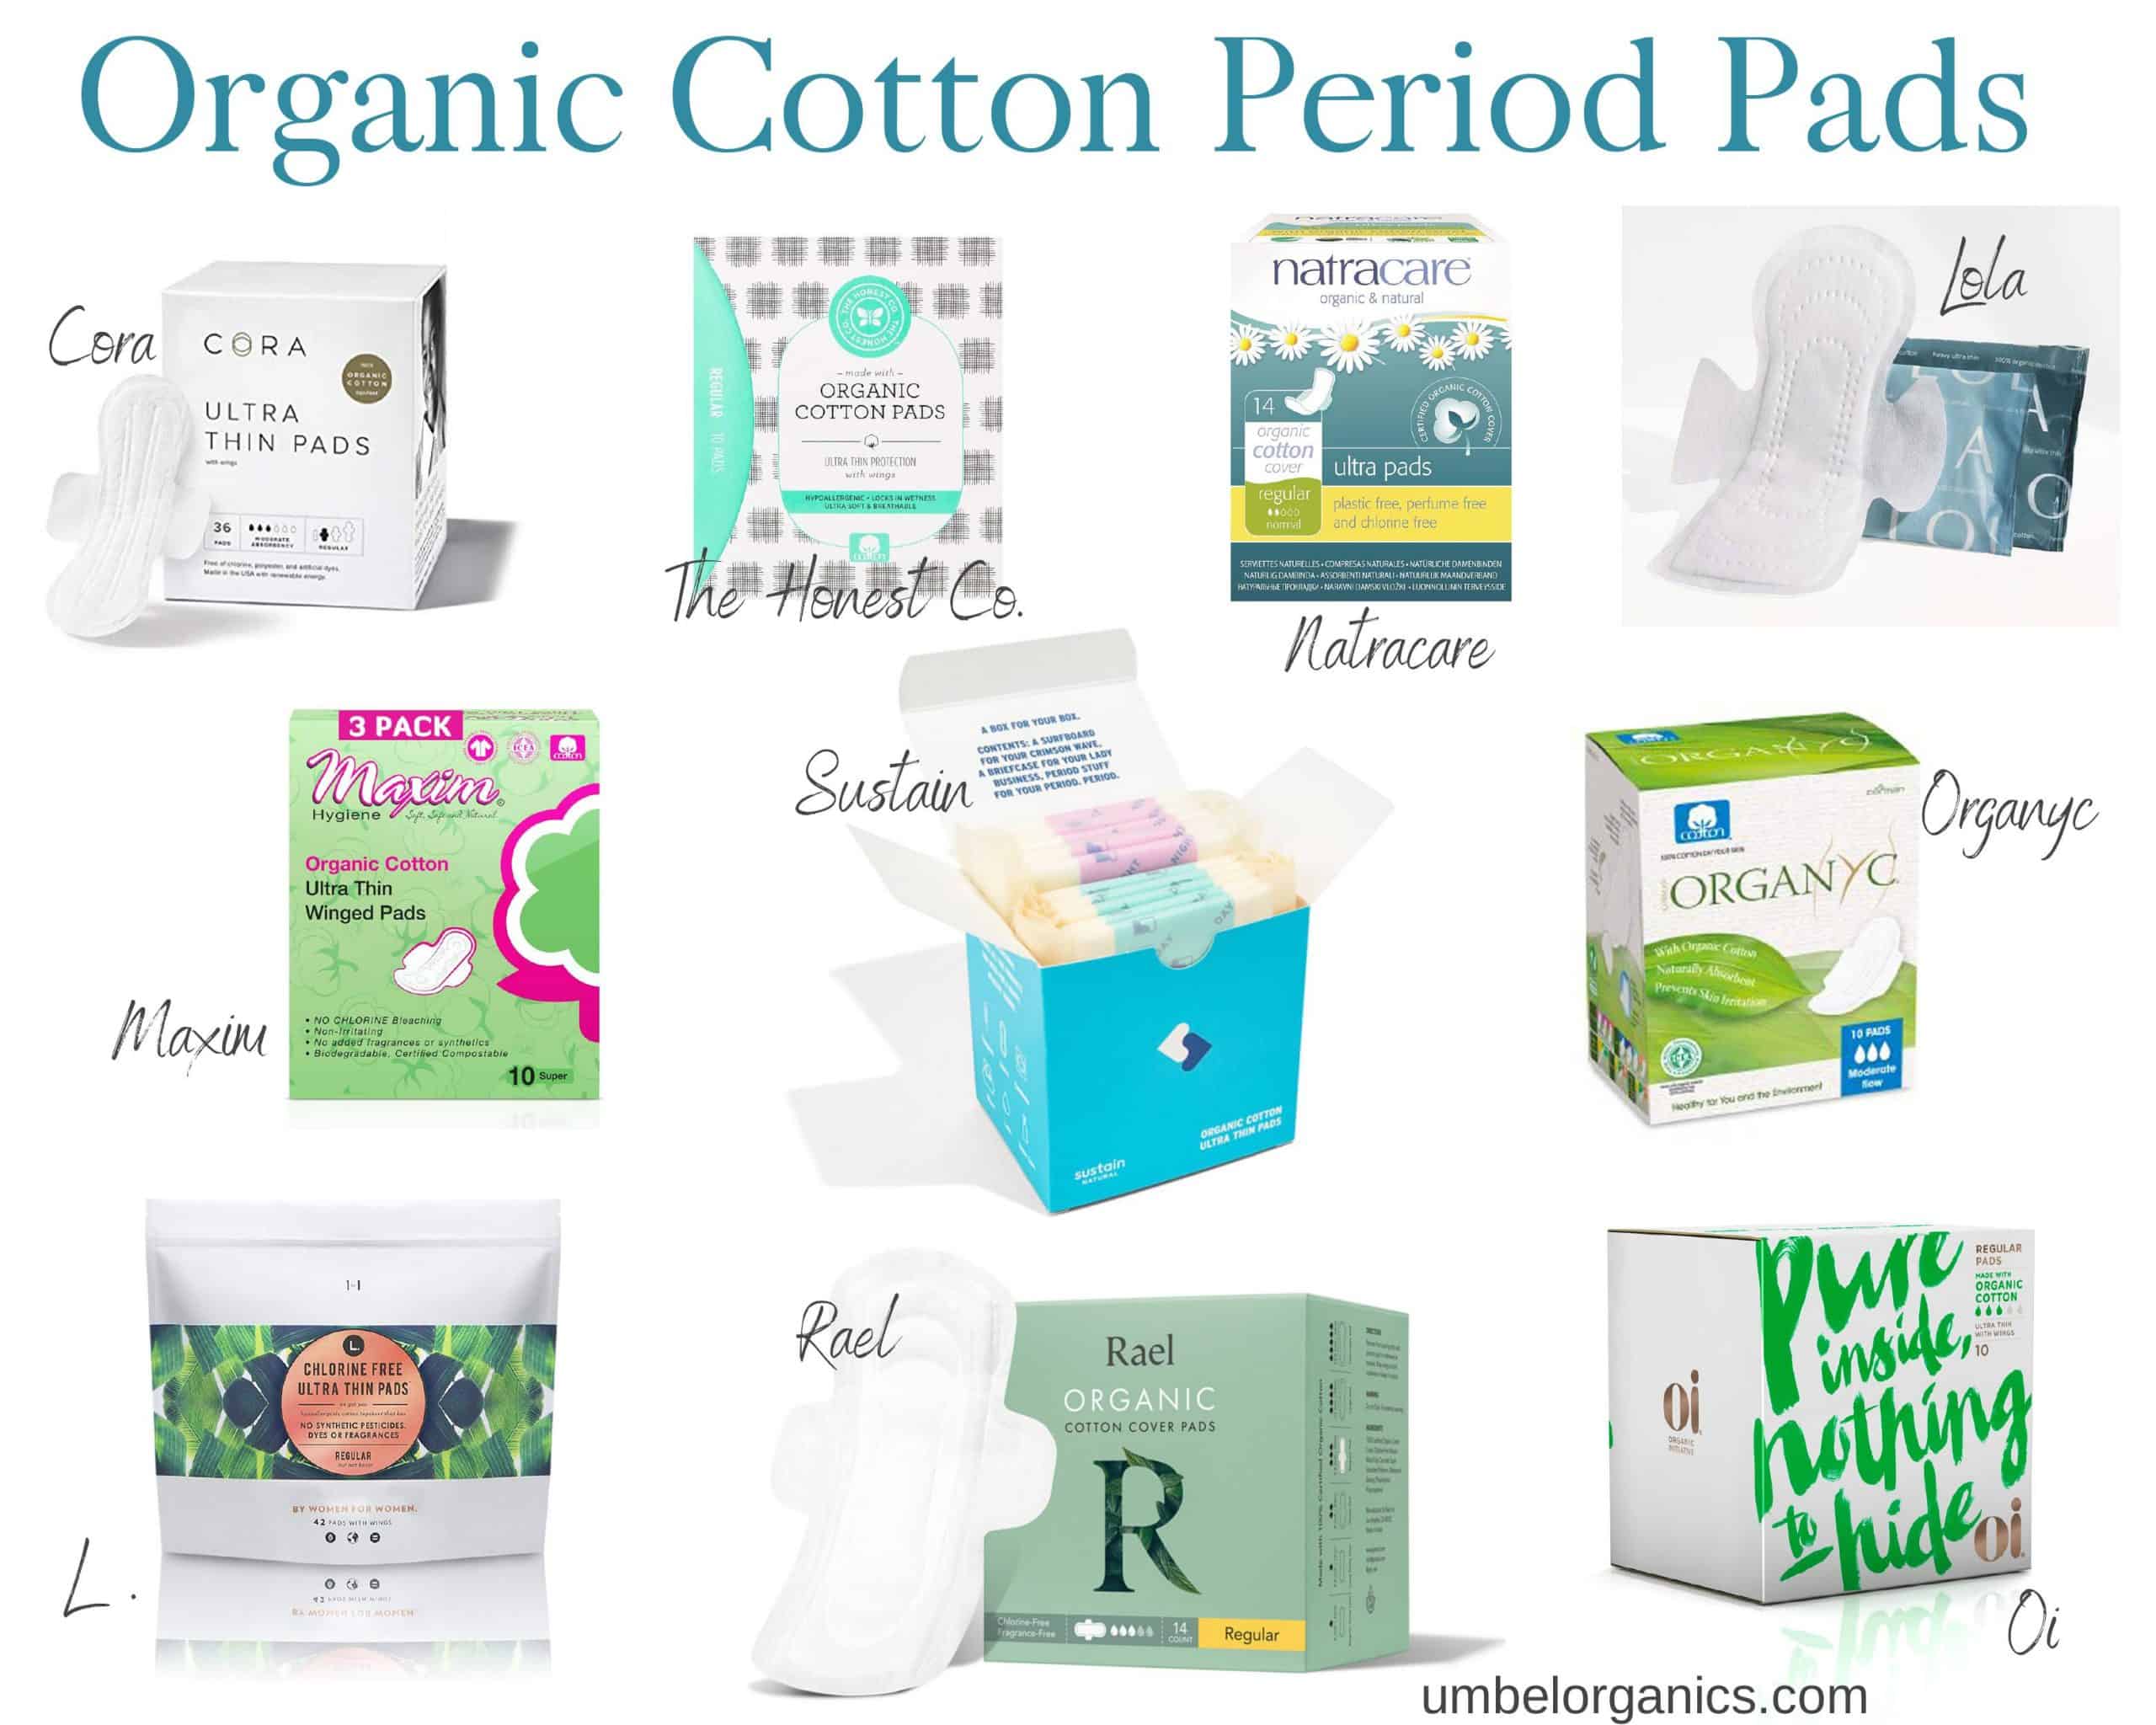 10 brands of organic cotton period pads